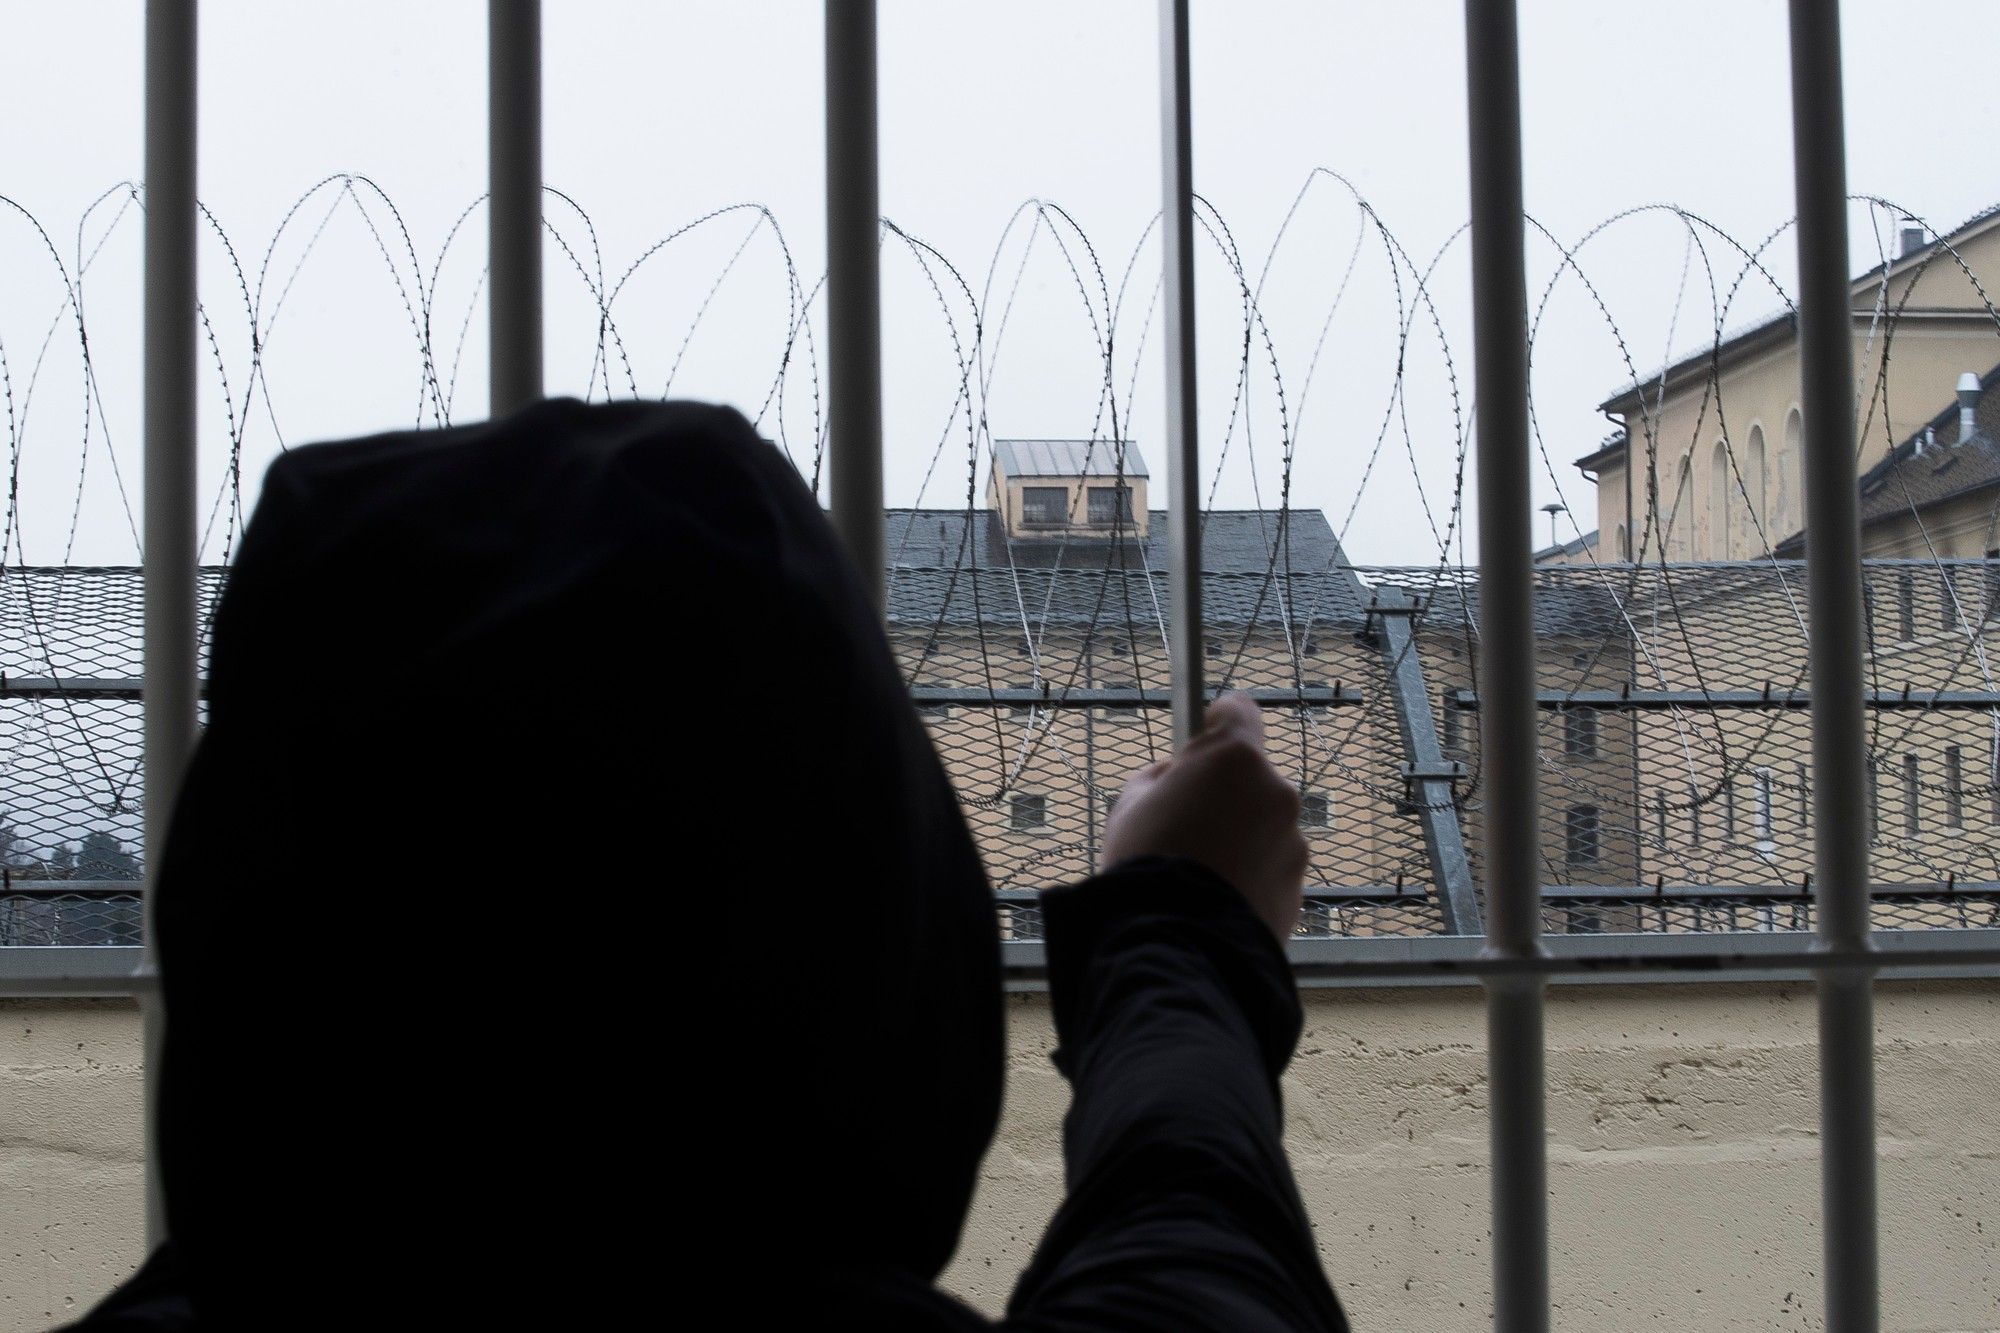 An inmate in New York is suing for having been denied access to an early release program.